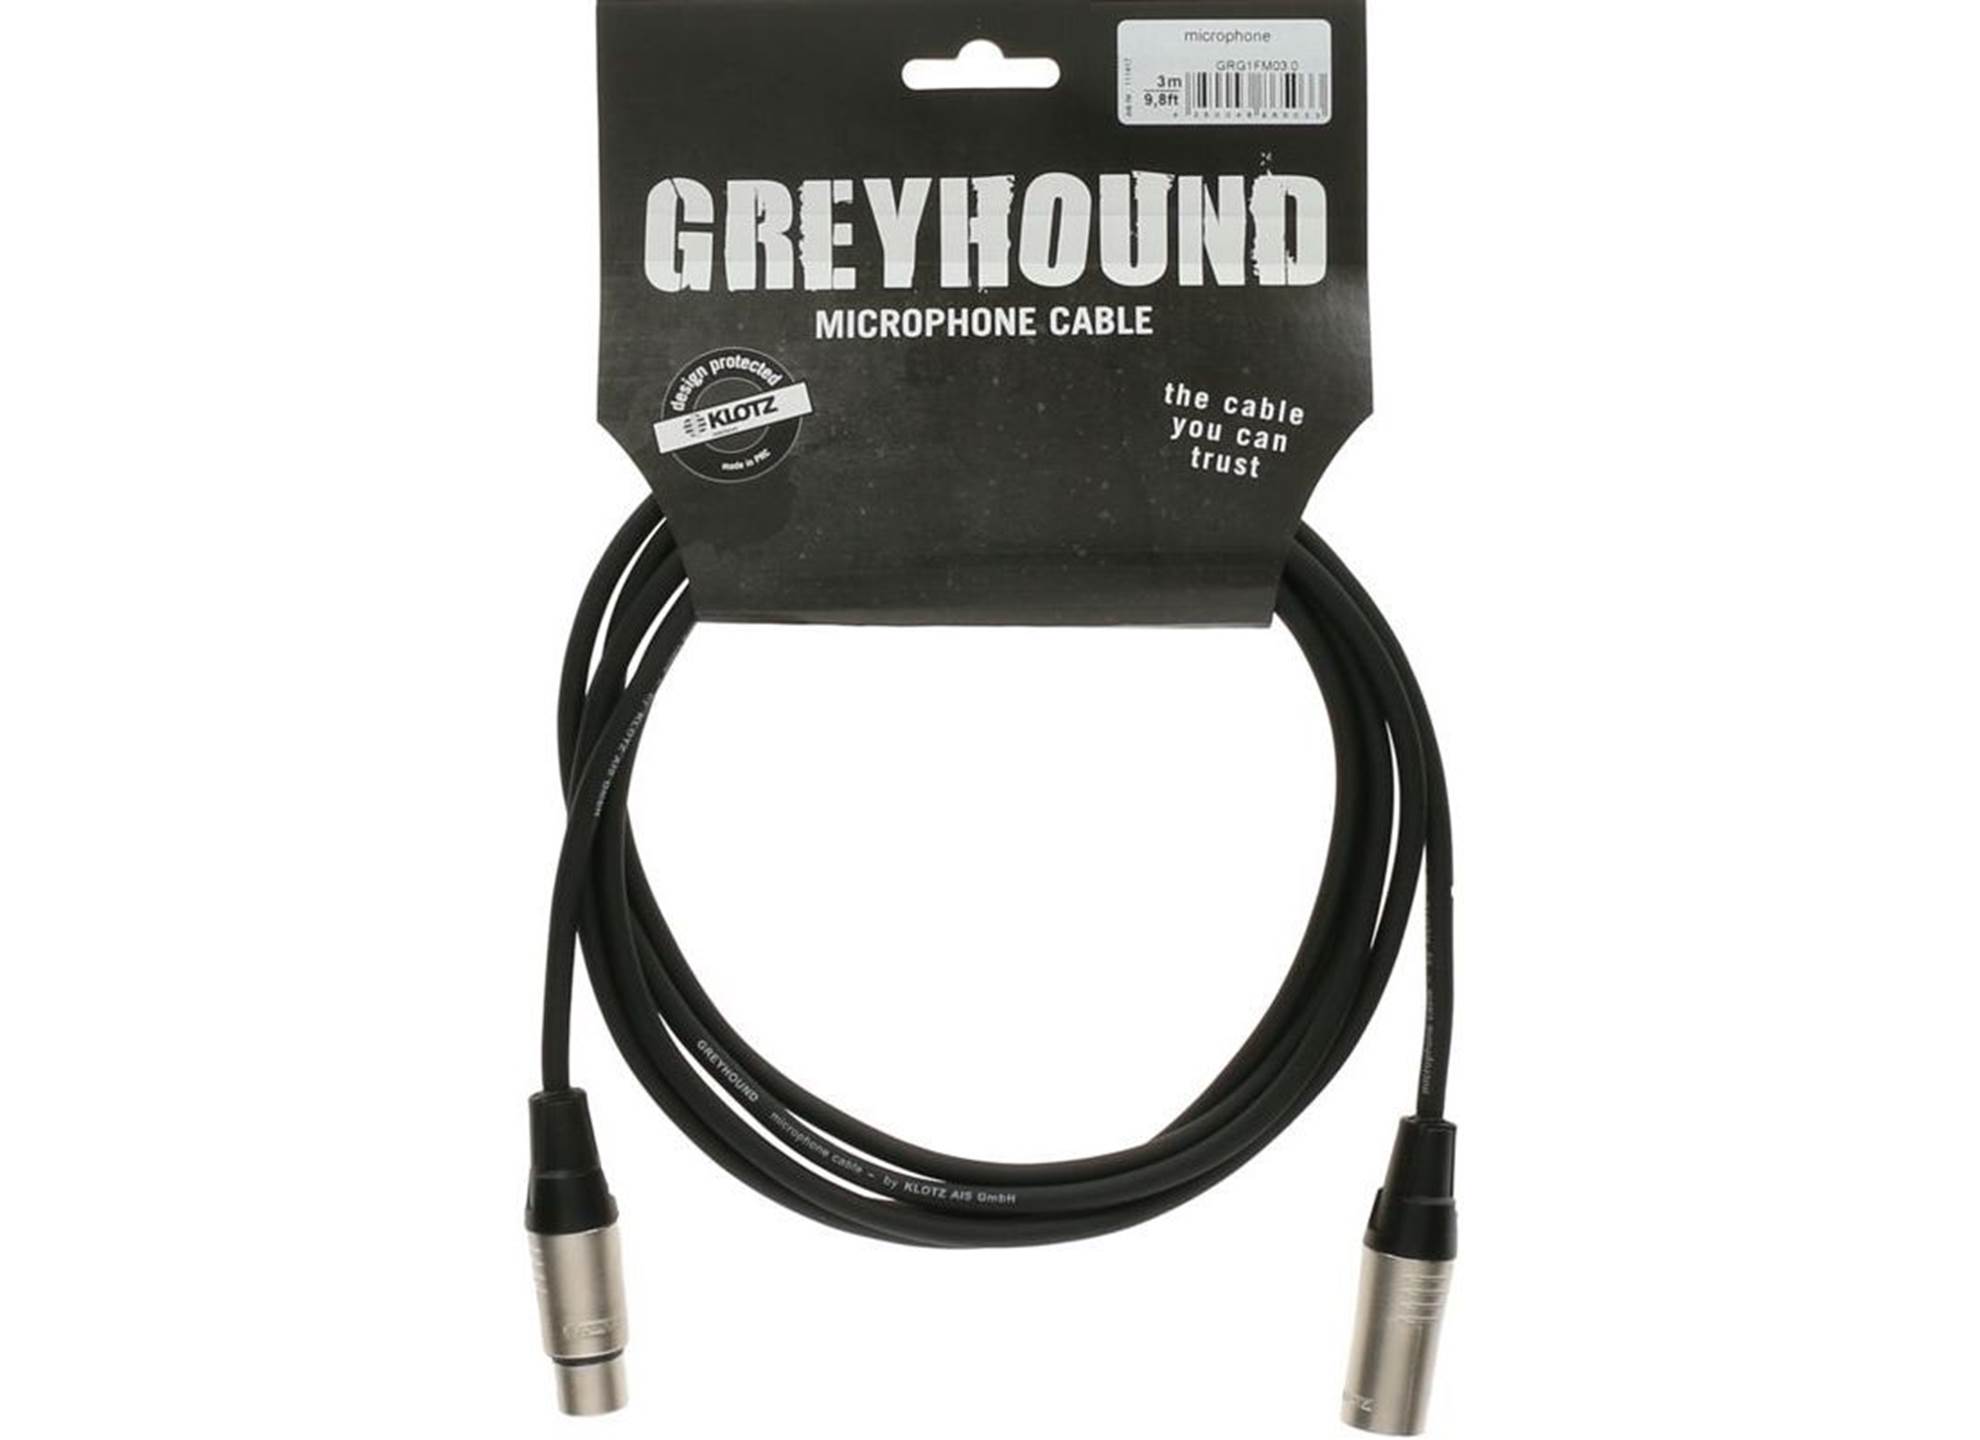 Greyhound microphone Cable 0.5m